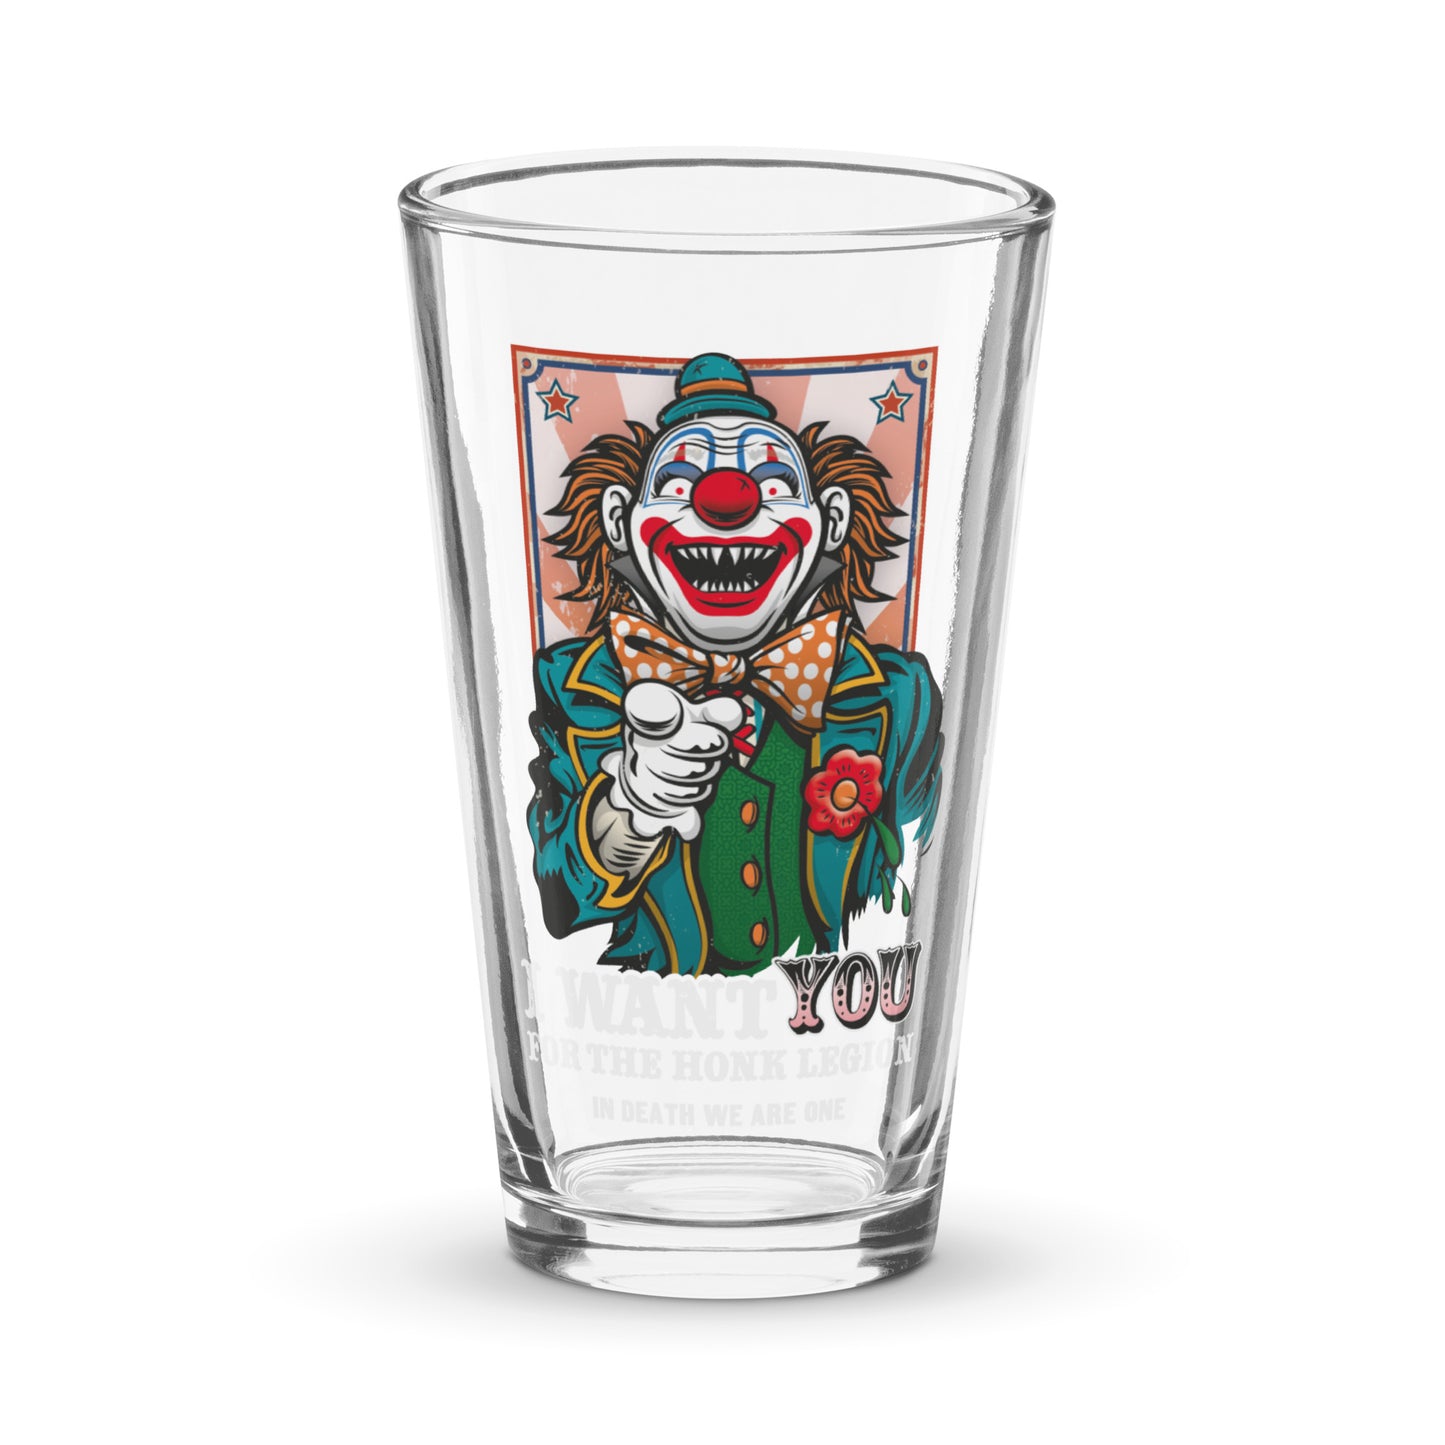 Chuckles Wants YOU - Pint Glass